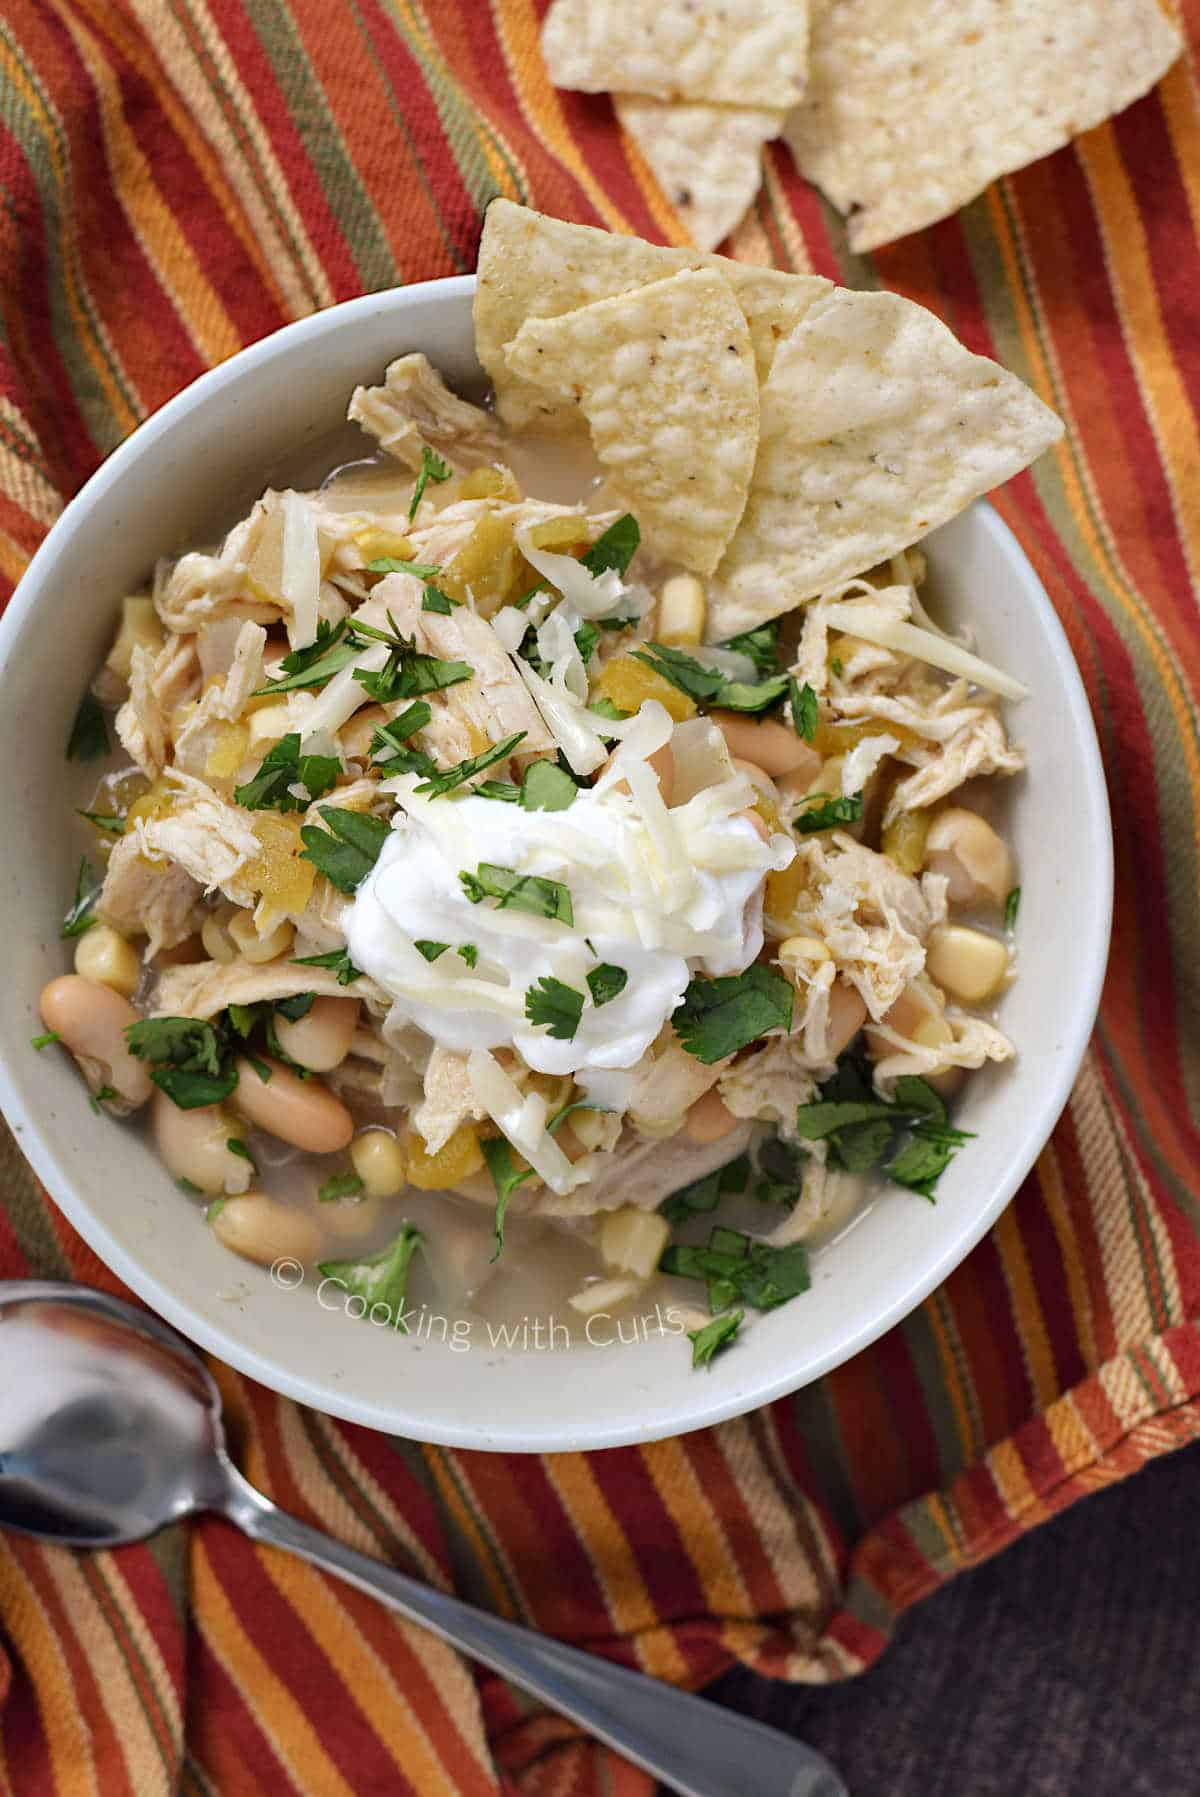 Looking down on a bowl of white bean chili with shredded chicken, corn, and green chilies topped with sour cream, cilantro, and tortilla chips.